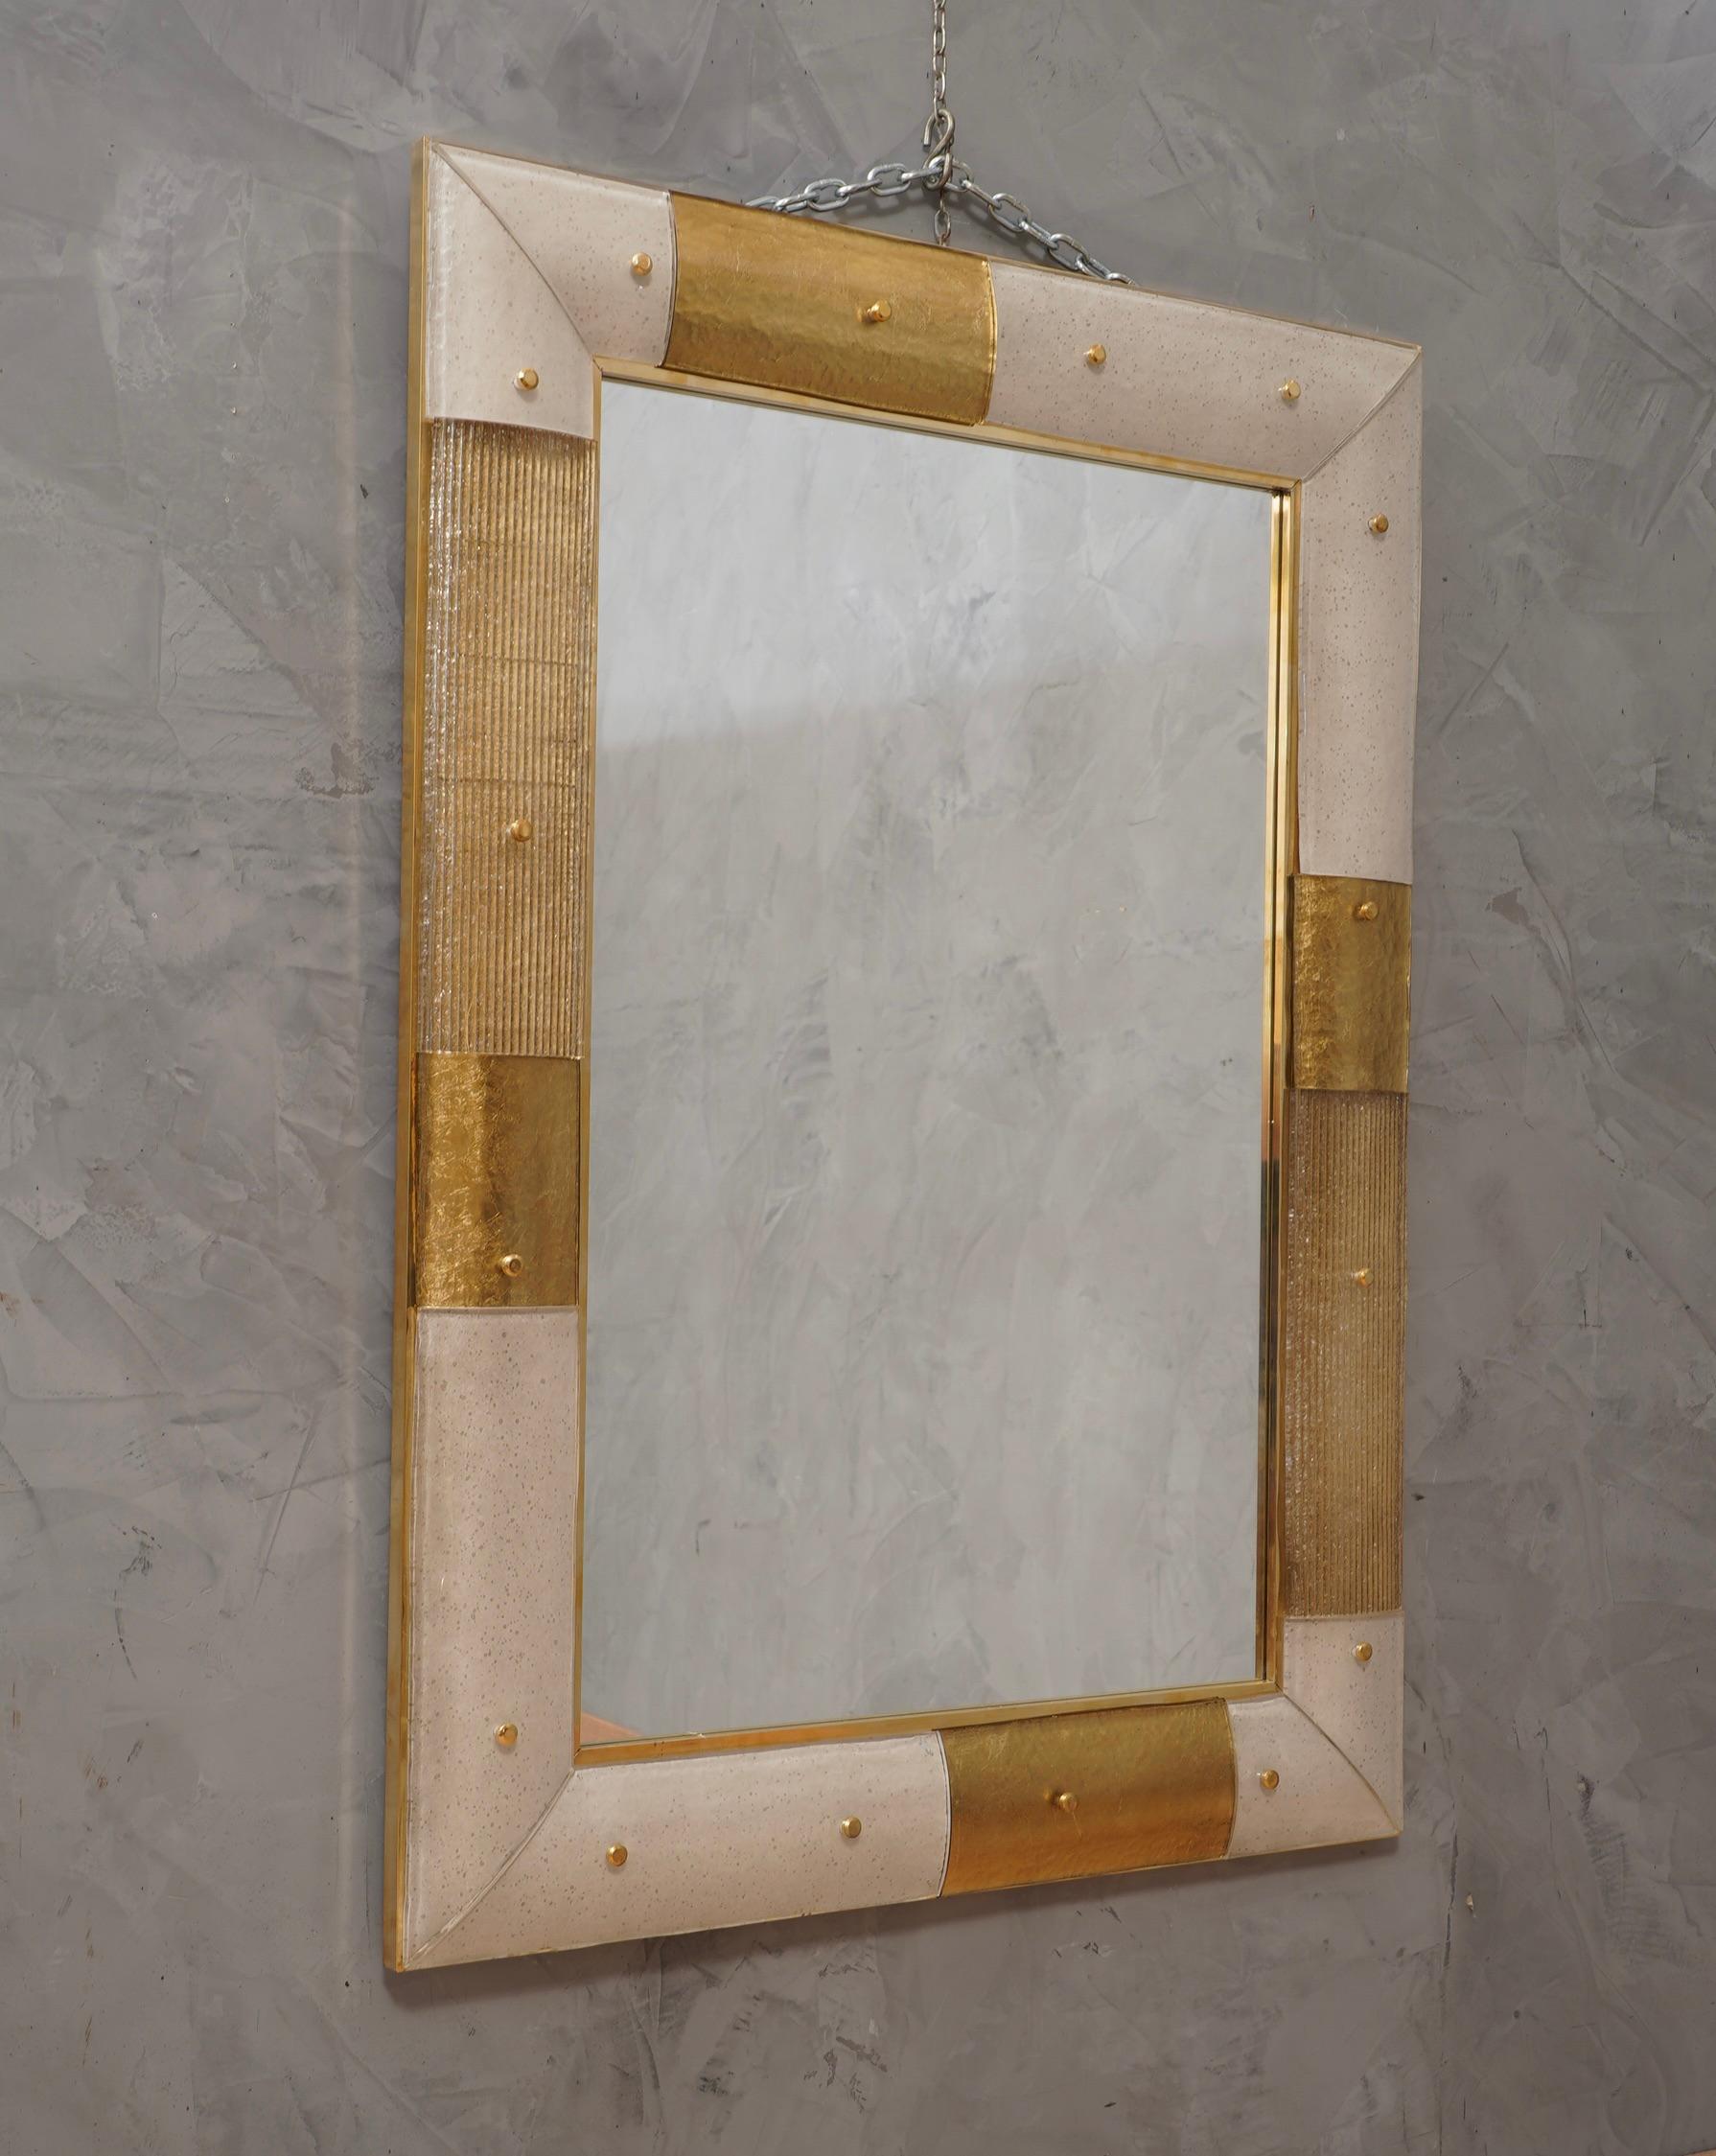 A strong white and gold frame reach the eye of the beholder leaving him entranced; of Murano gold and white art glass wall mirror. 

The structure of the wall mirror is in wood, where the gold and white Murano glass is housed. The frame of the